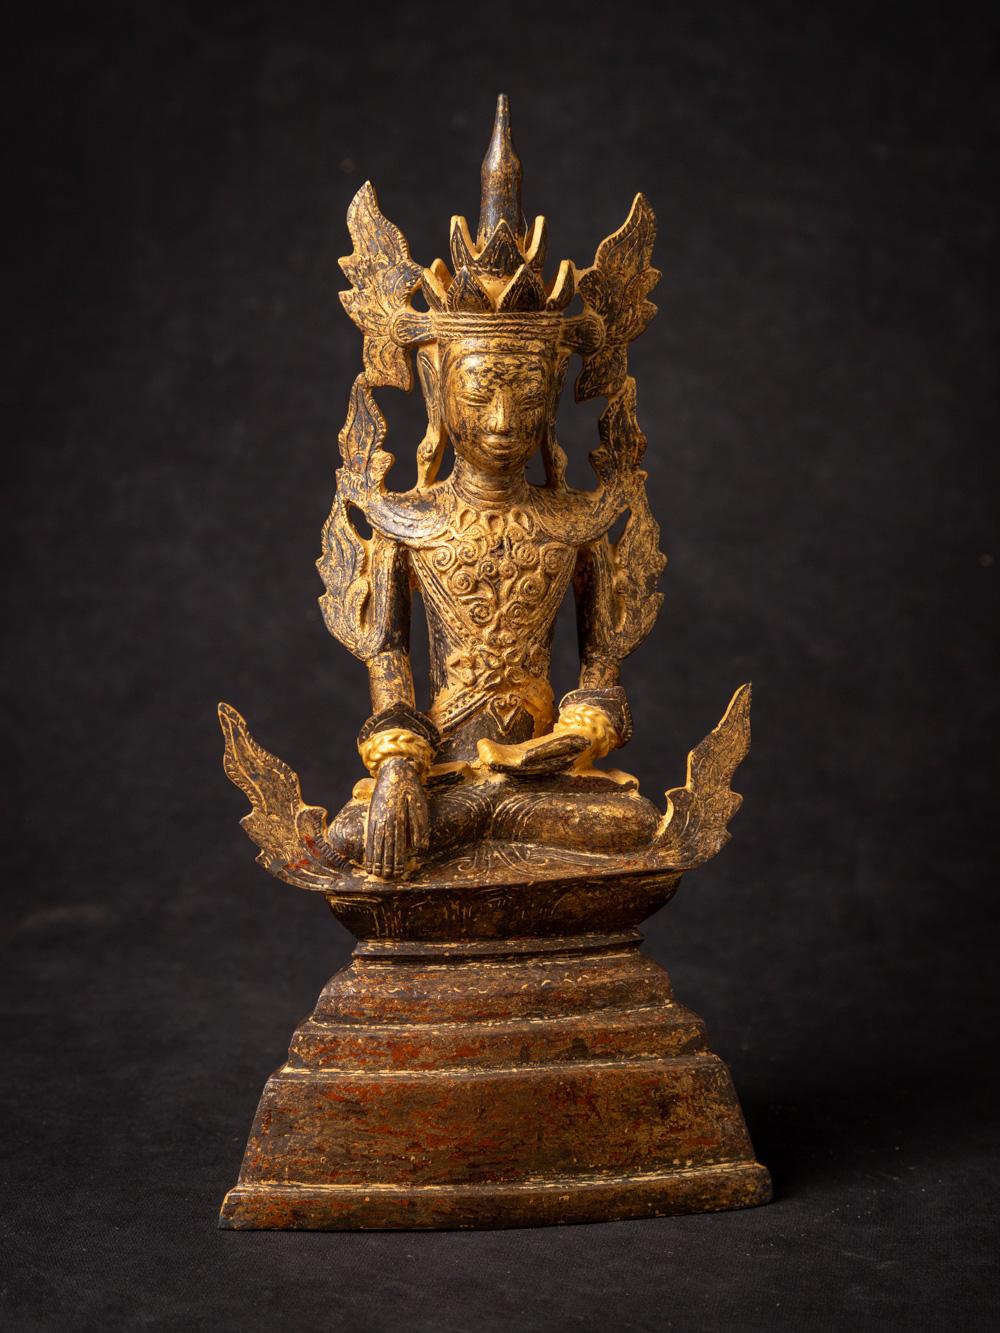 Material : bronze
26,6 cm high
13,6 cm wide and 6,3 cm deep
With traces of the original 24 krt. gilding
Shan (Tai Yai) style
Bhumisparsha mudra
18th century
Was painted with gold paint in the 20th century, which has been partly removed. I think it